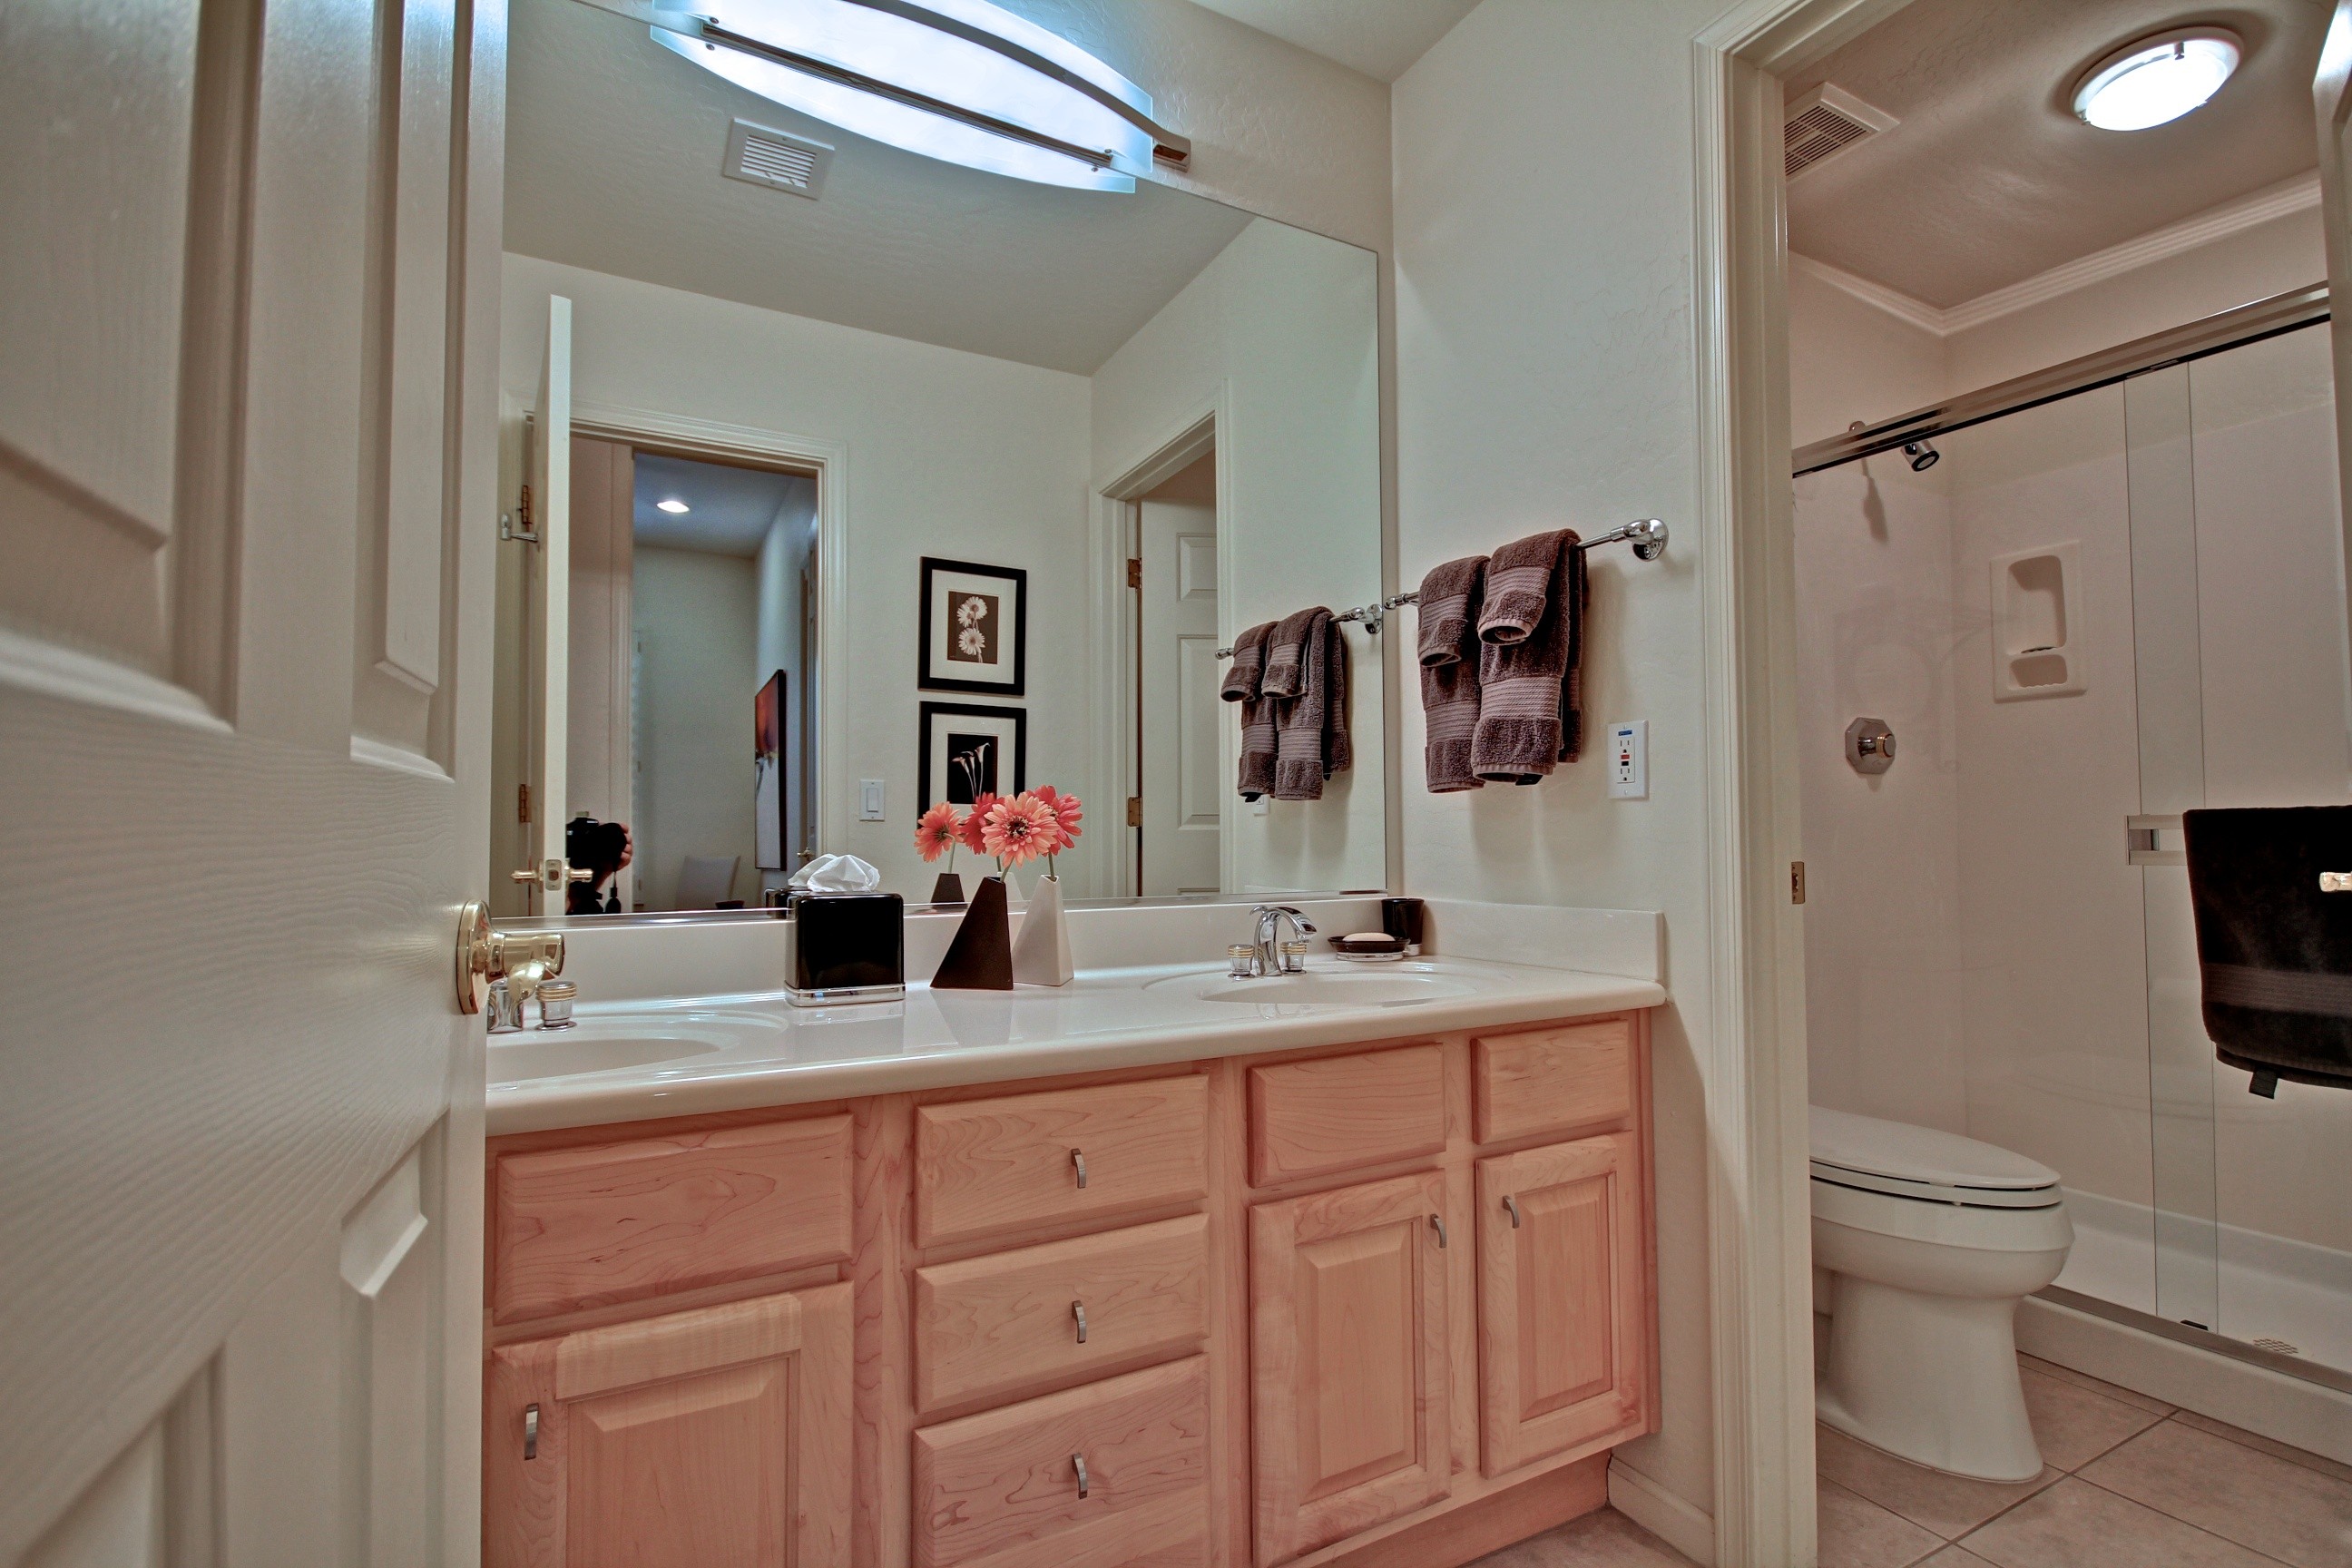 Full guest bath at this Scottsdale home for sale in DC Ranch located at 20534 N 95th St Scottsdale, AZ 85255 listed by Don Matheson at The Matheson Team